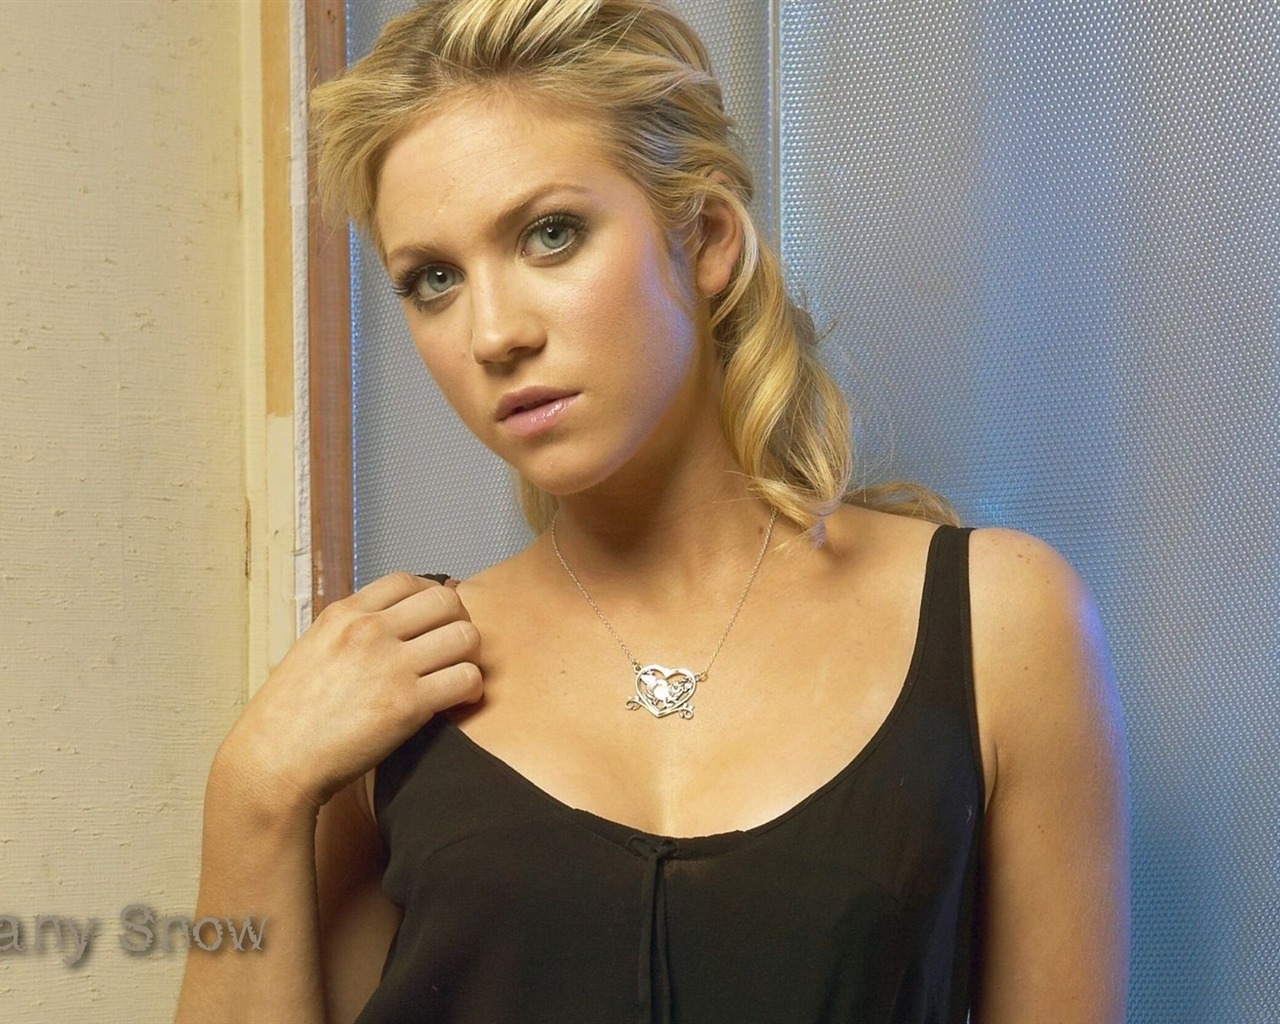 Brittany Snow #009 - 1280x1024 Wallpapers Pictures Photos Images